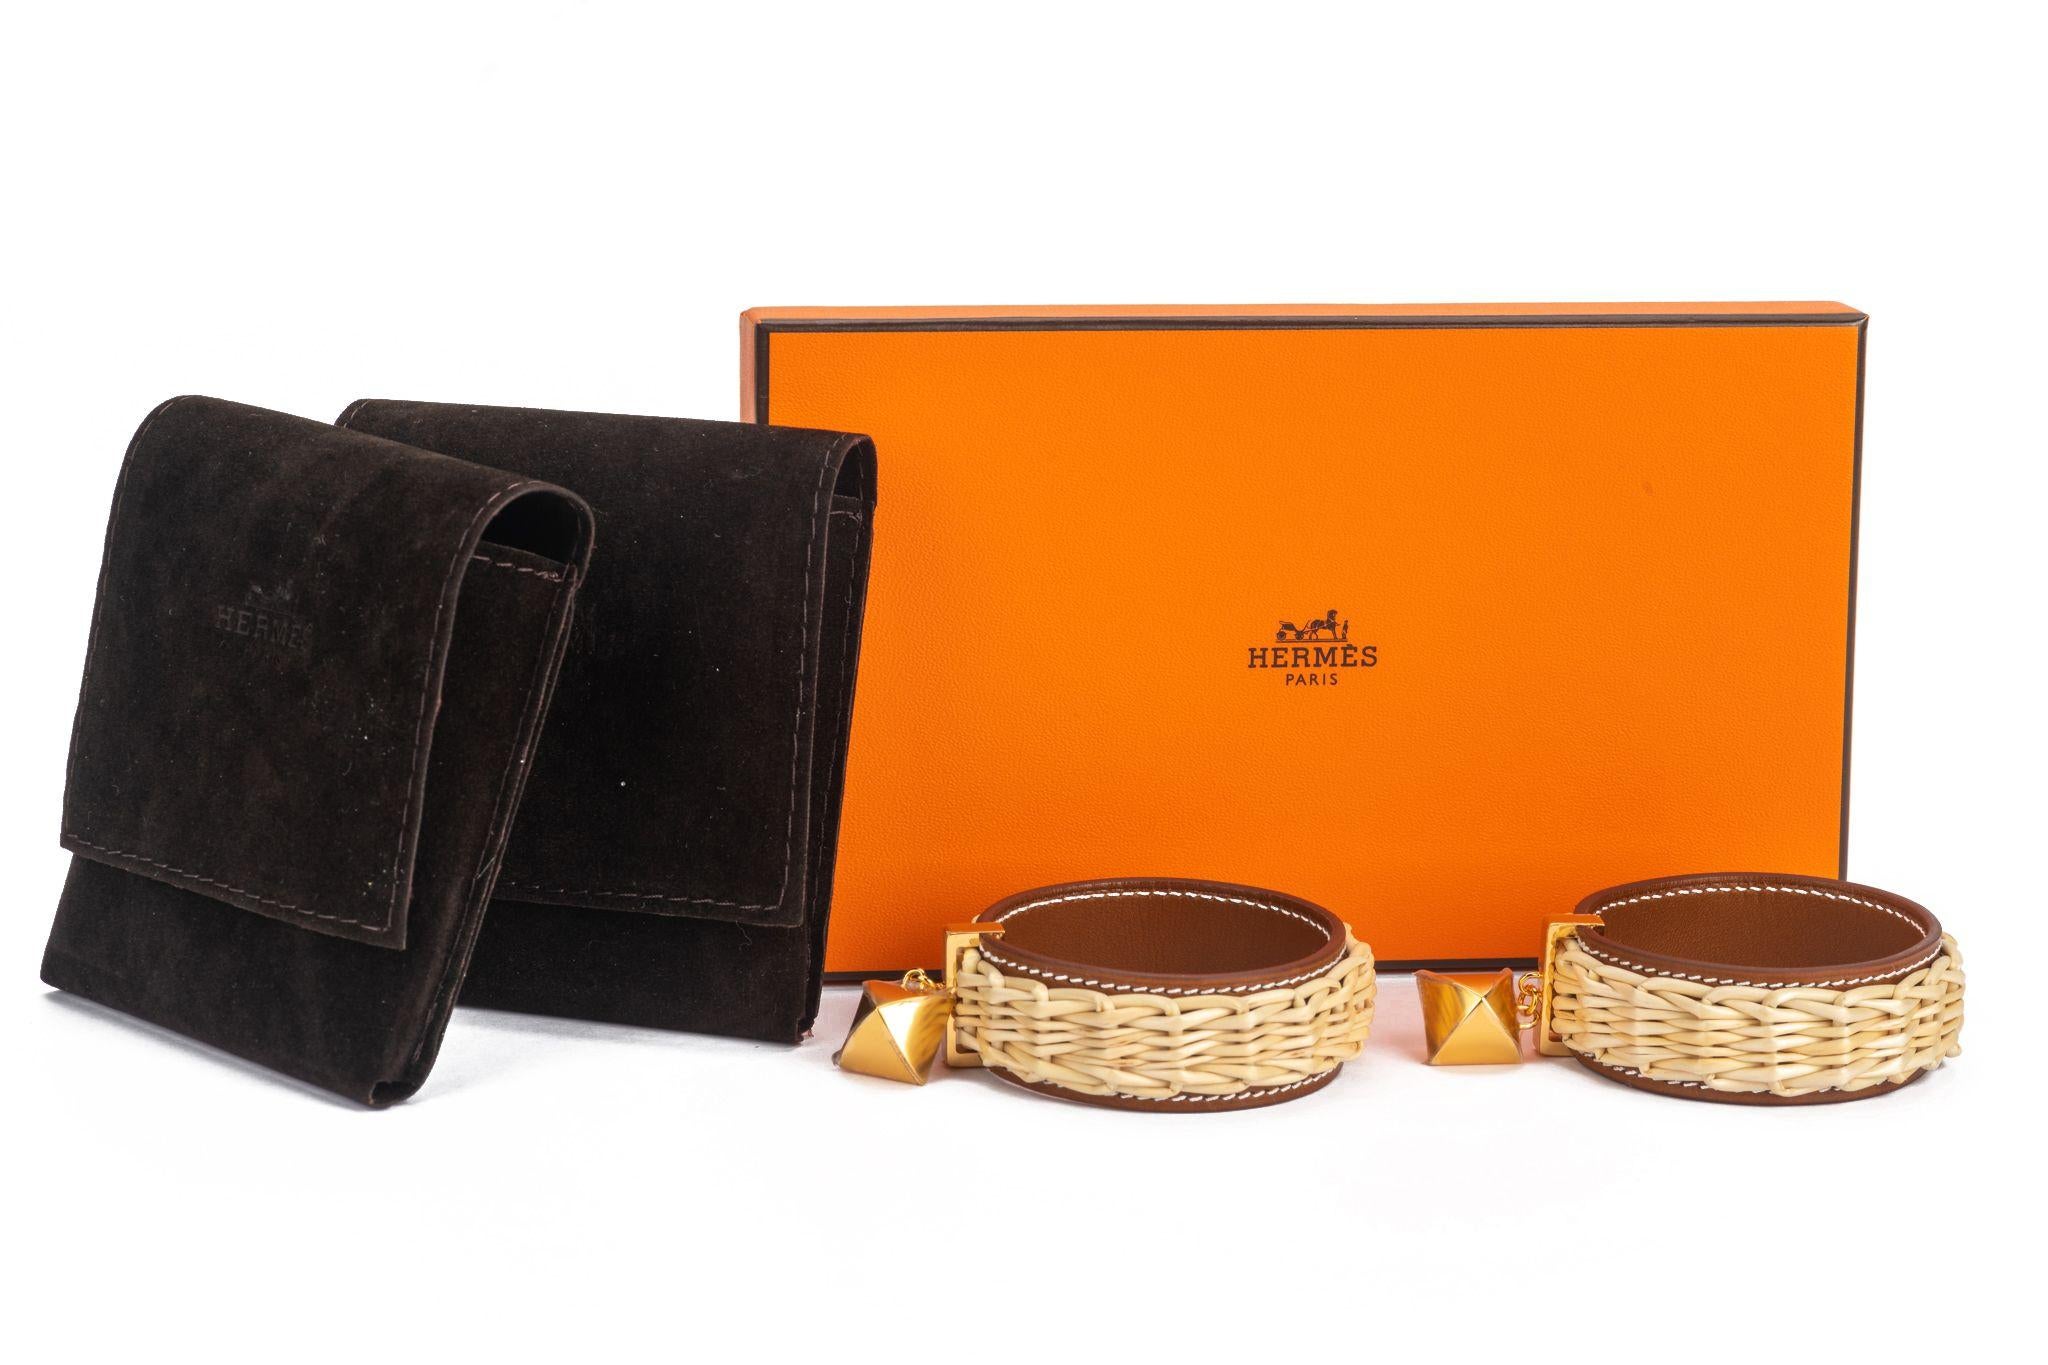 Hermès natural wicker earrings with leather features. The earrings are like creoles and have gold studs. They are new and come with a pouch and original box.